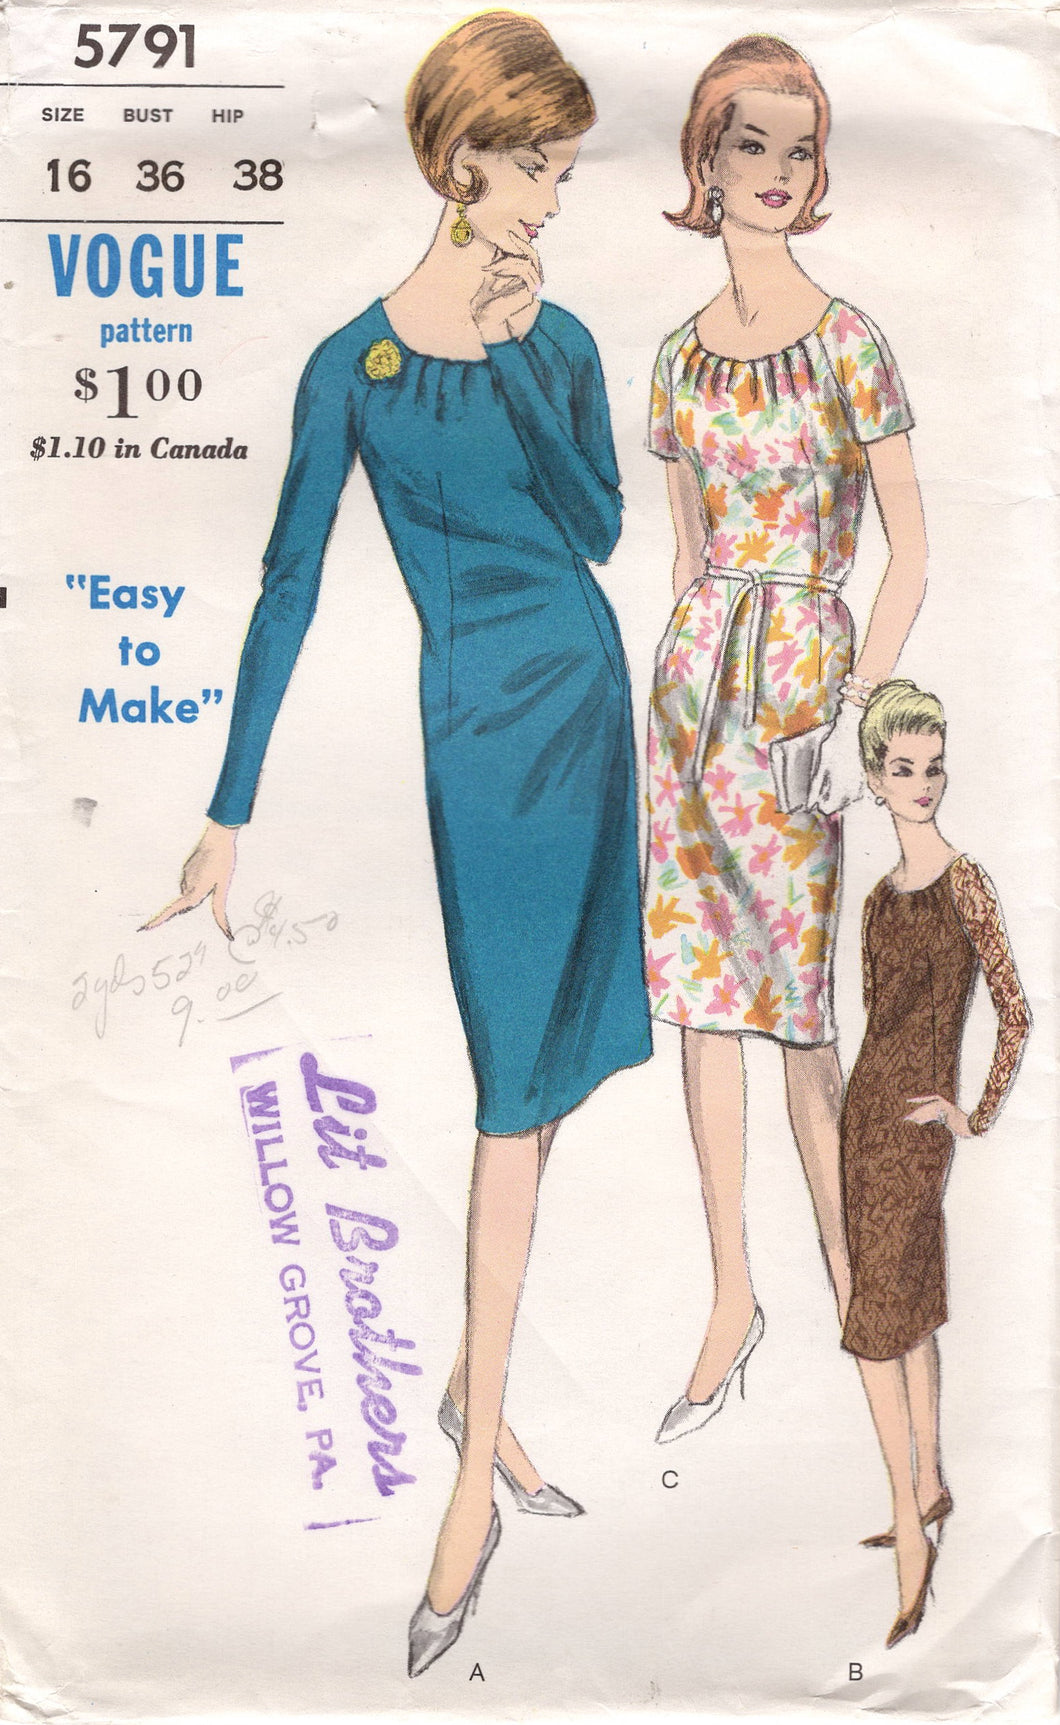 1960's Vogue One Piece Sheath Dress with Tucked Neckline and Raglan Sleeves - Bust 36